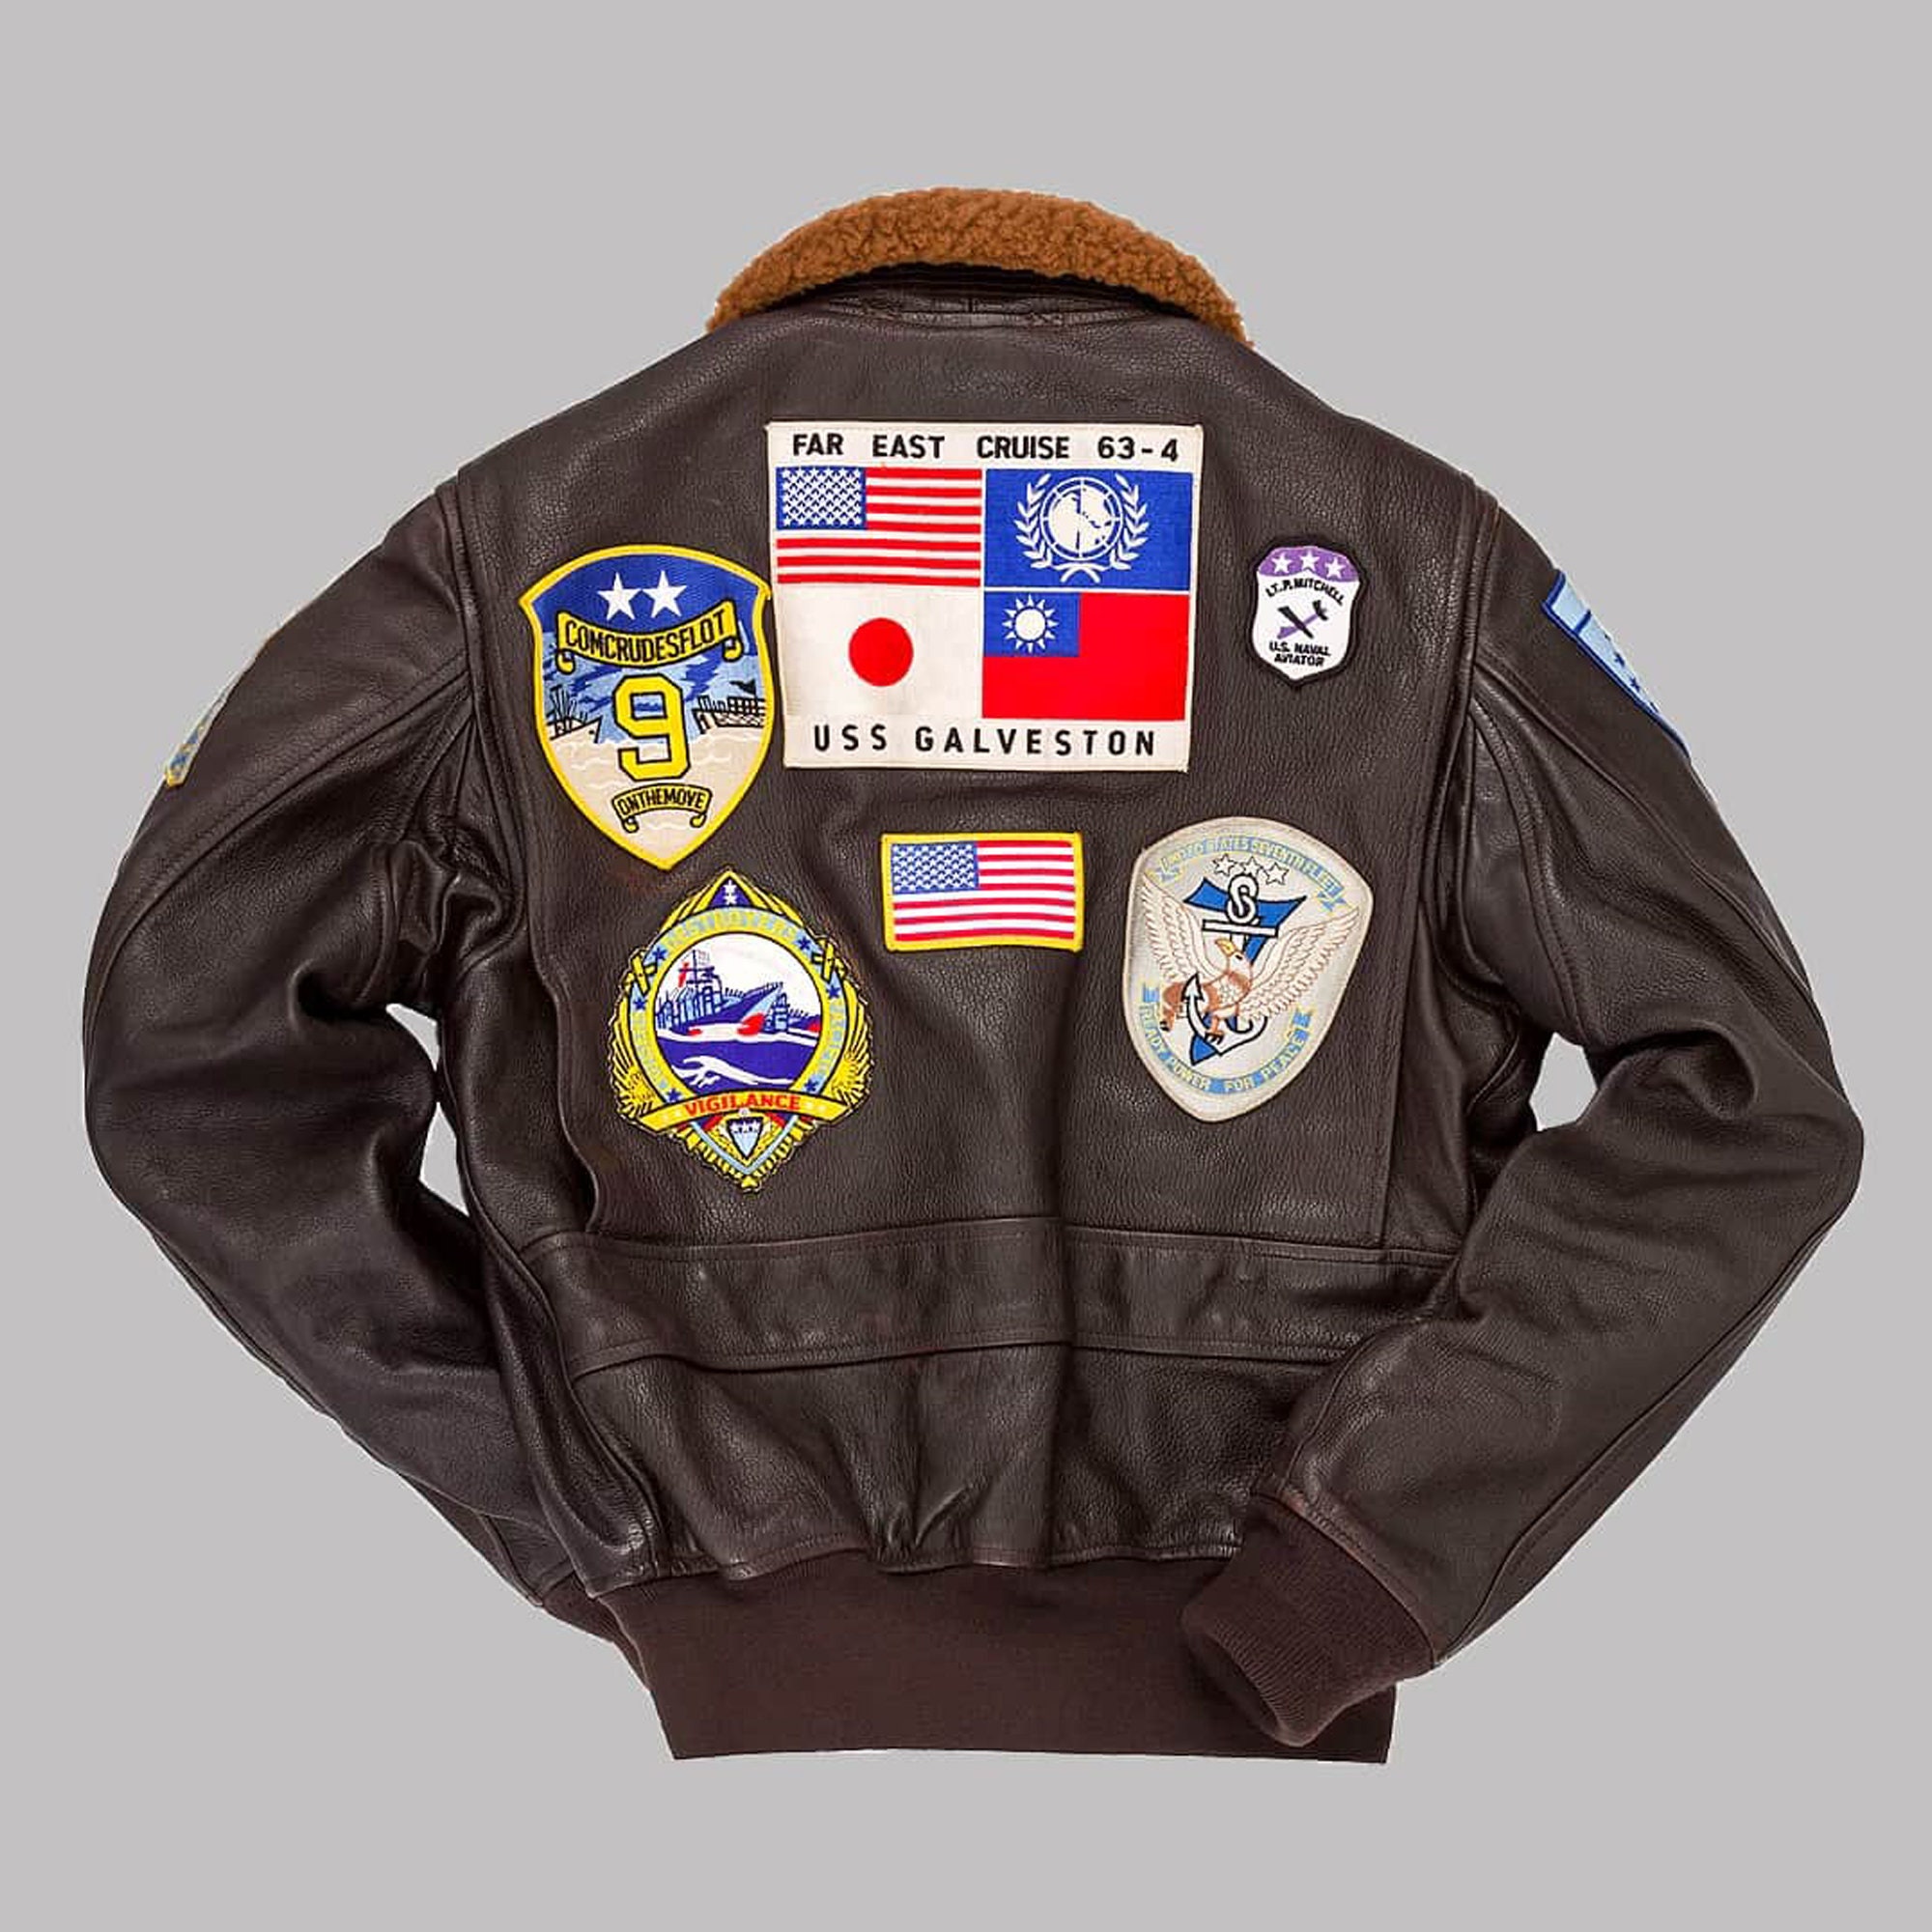 Buy Men's Maverick Top Gun Leather Jacket Bomber Cowhide Real Leather Jacket-pete  Maverick Tom Cruise Leather Jacket With Embroidery Patches Online in India  